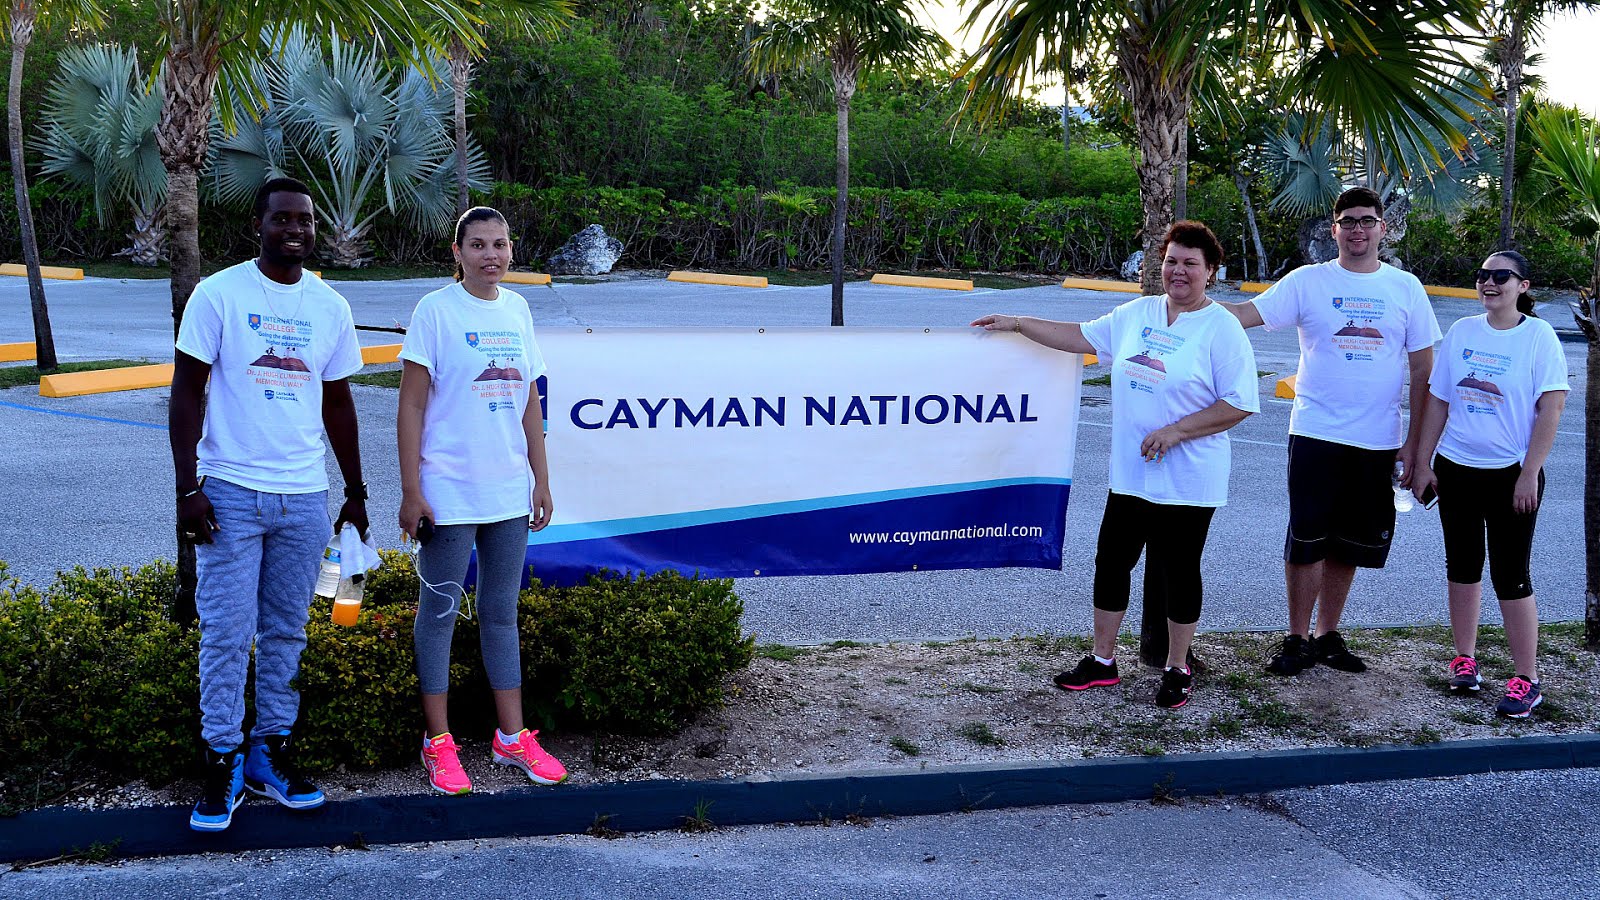 Cayman National Bank Online - Bank Choices